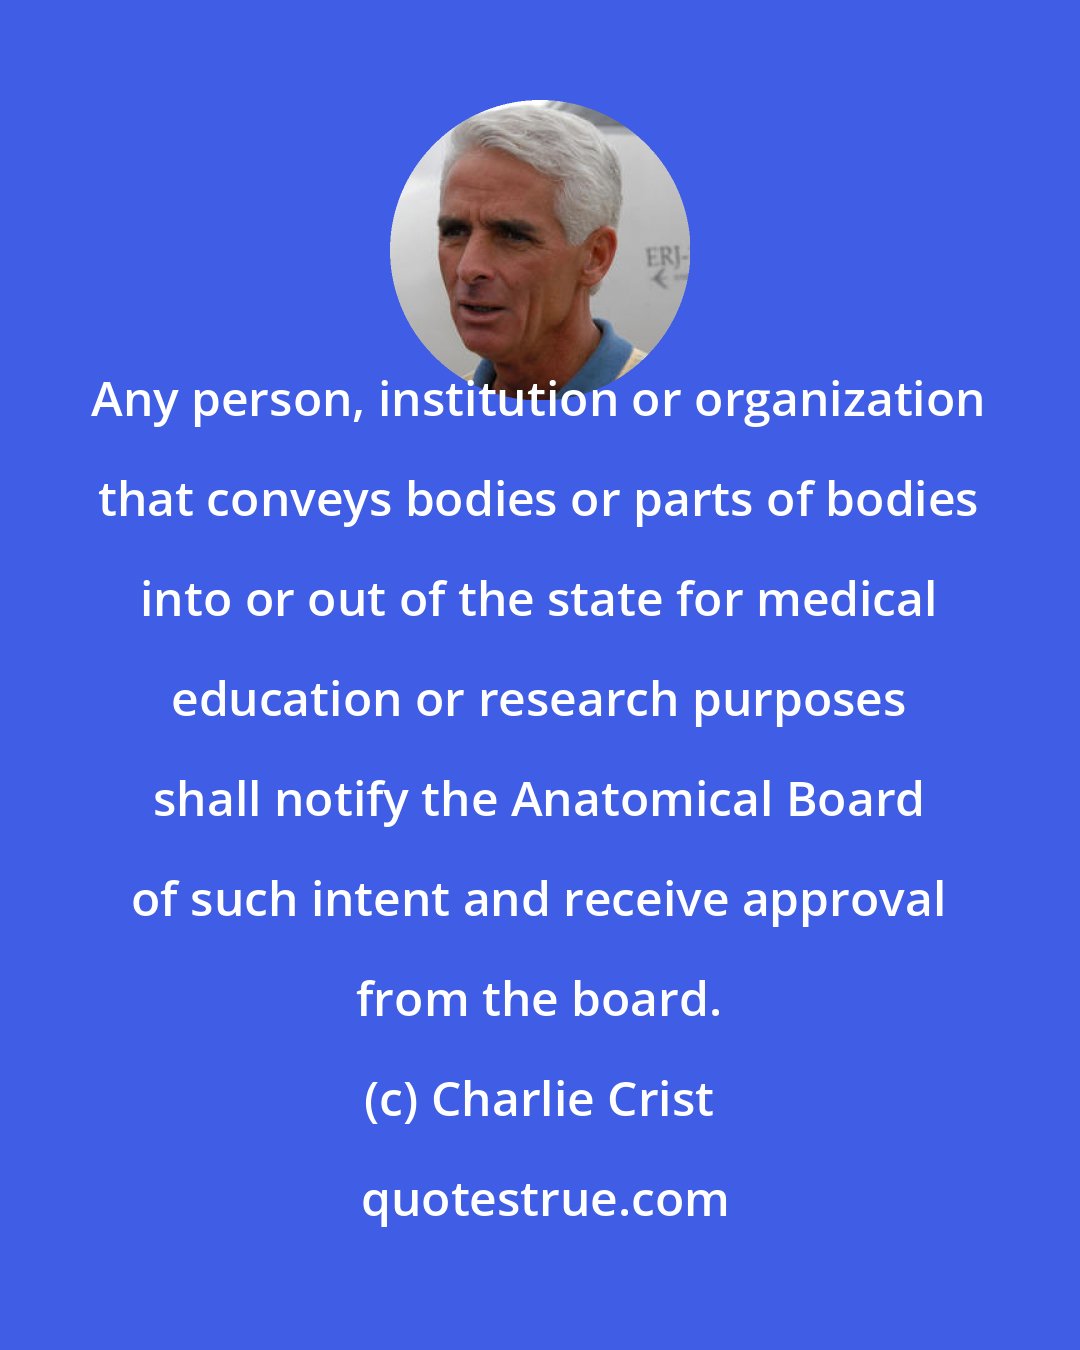 Charlie Crist: Any person, institution or organization that conveys bodies or parts of bodies into or out of the state for medical education or research purposes shall notify the Anatomical Board of such intent and receive approval from the board.